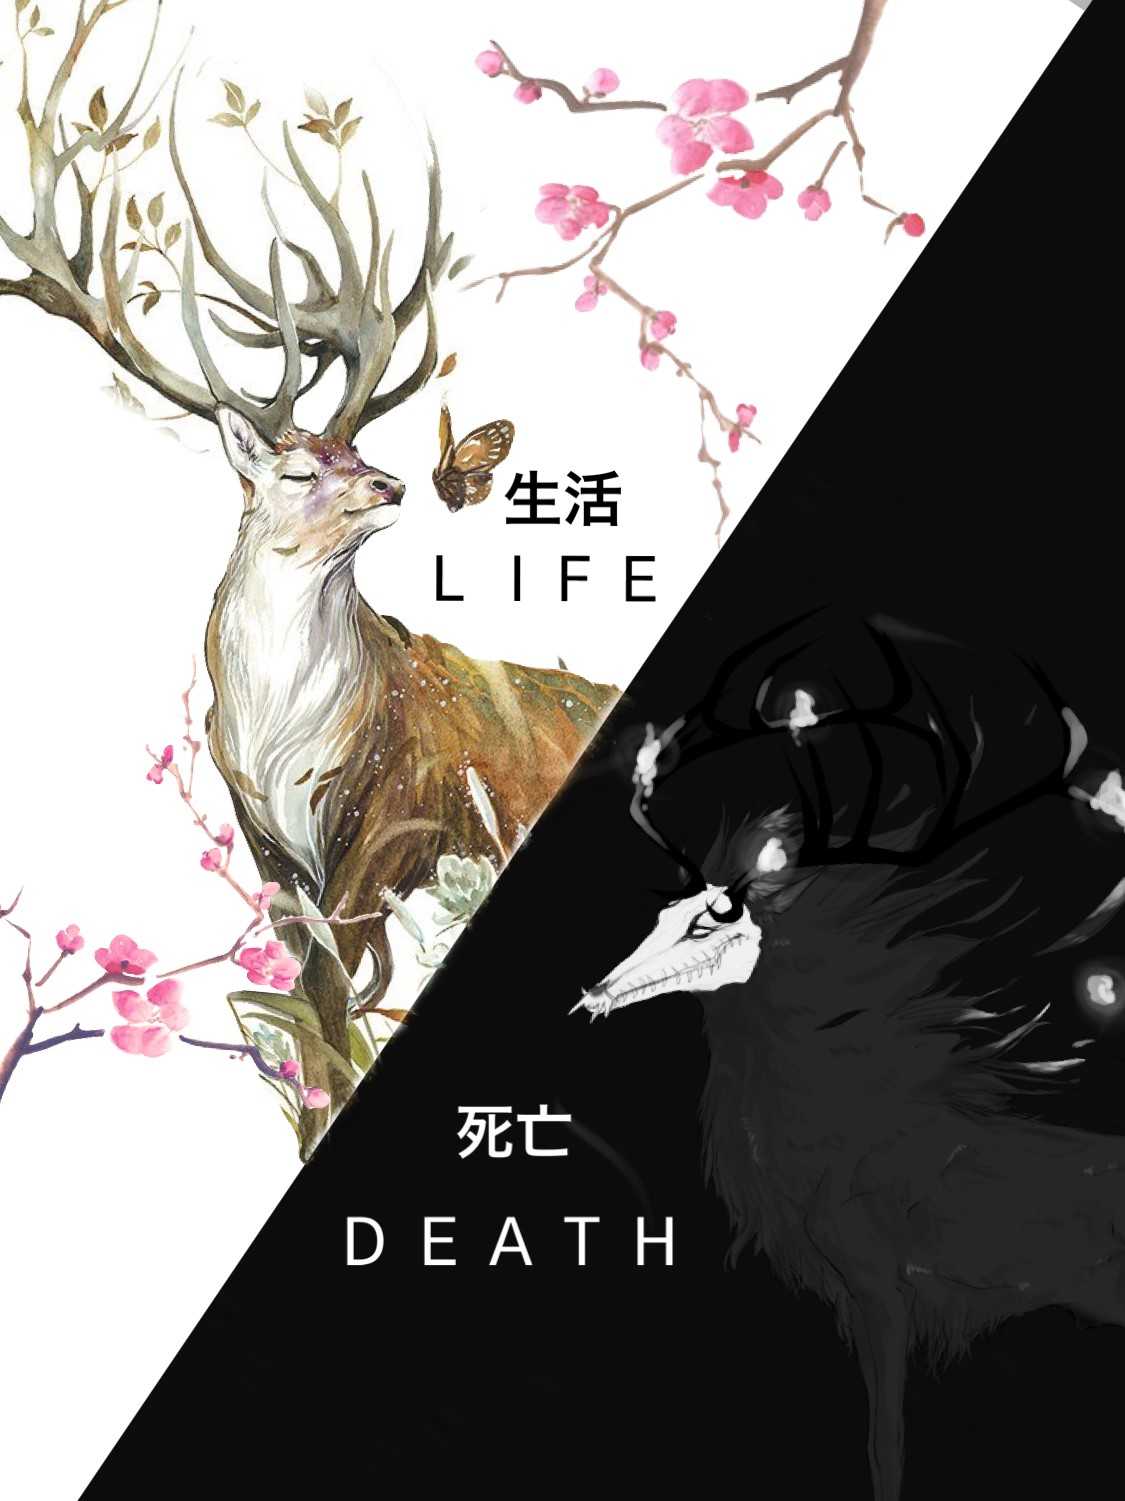 Life Death iPhone Wallpaper  iPhone Wallpapers